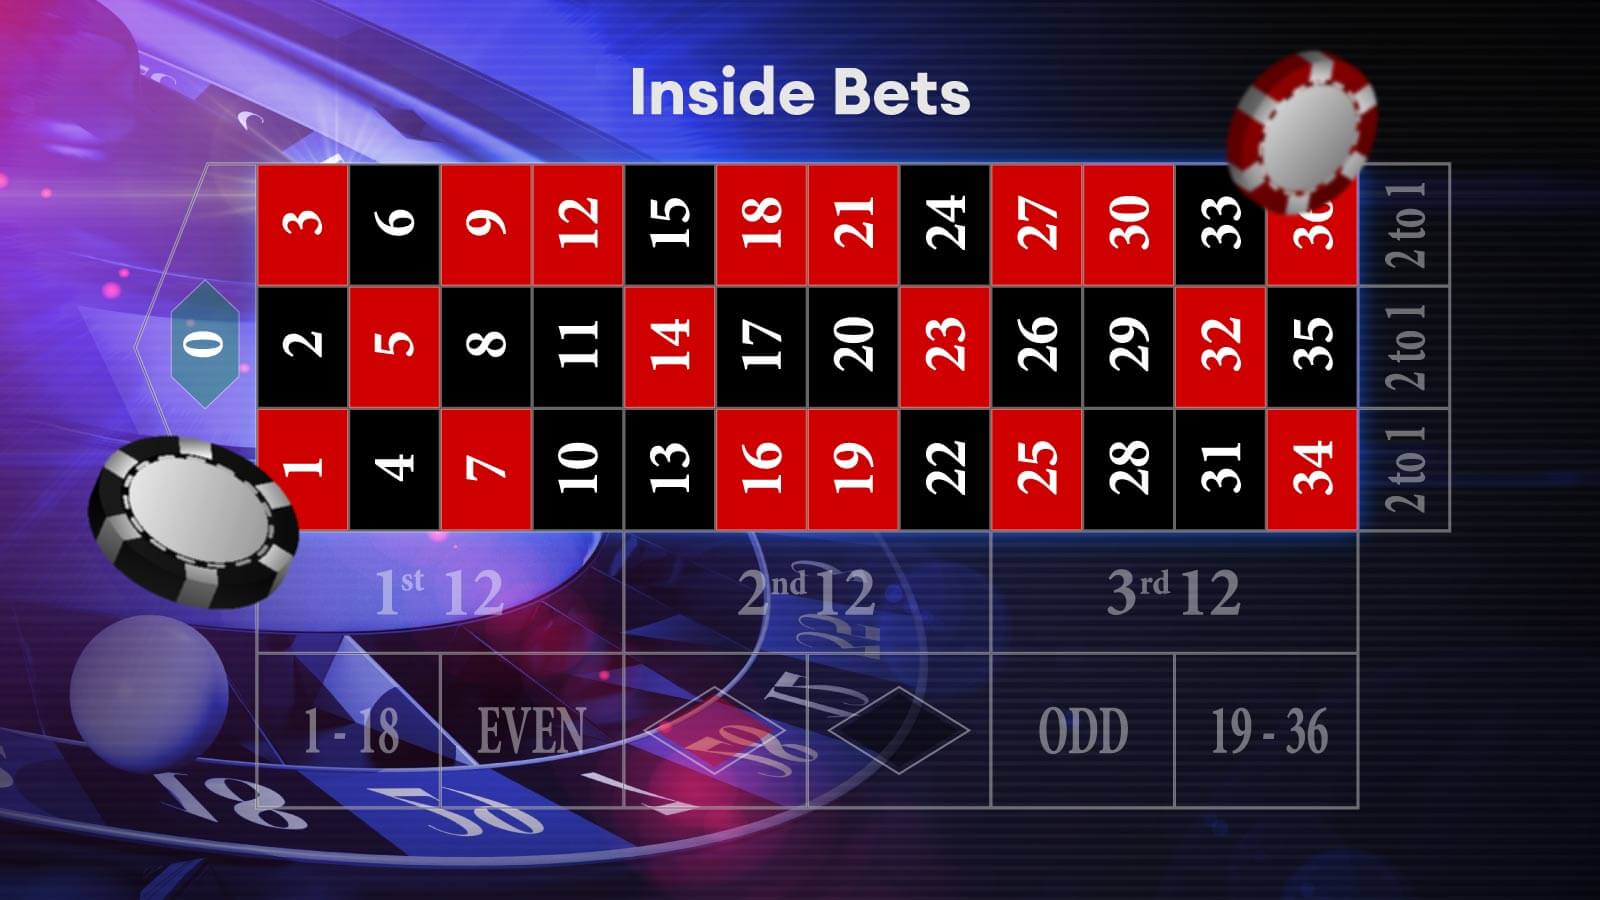 Inside Bets What They Are, Odds, and Best Numbers